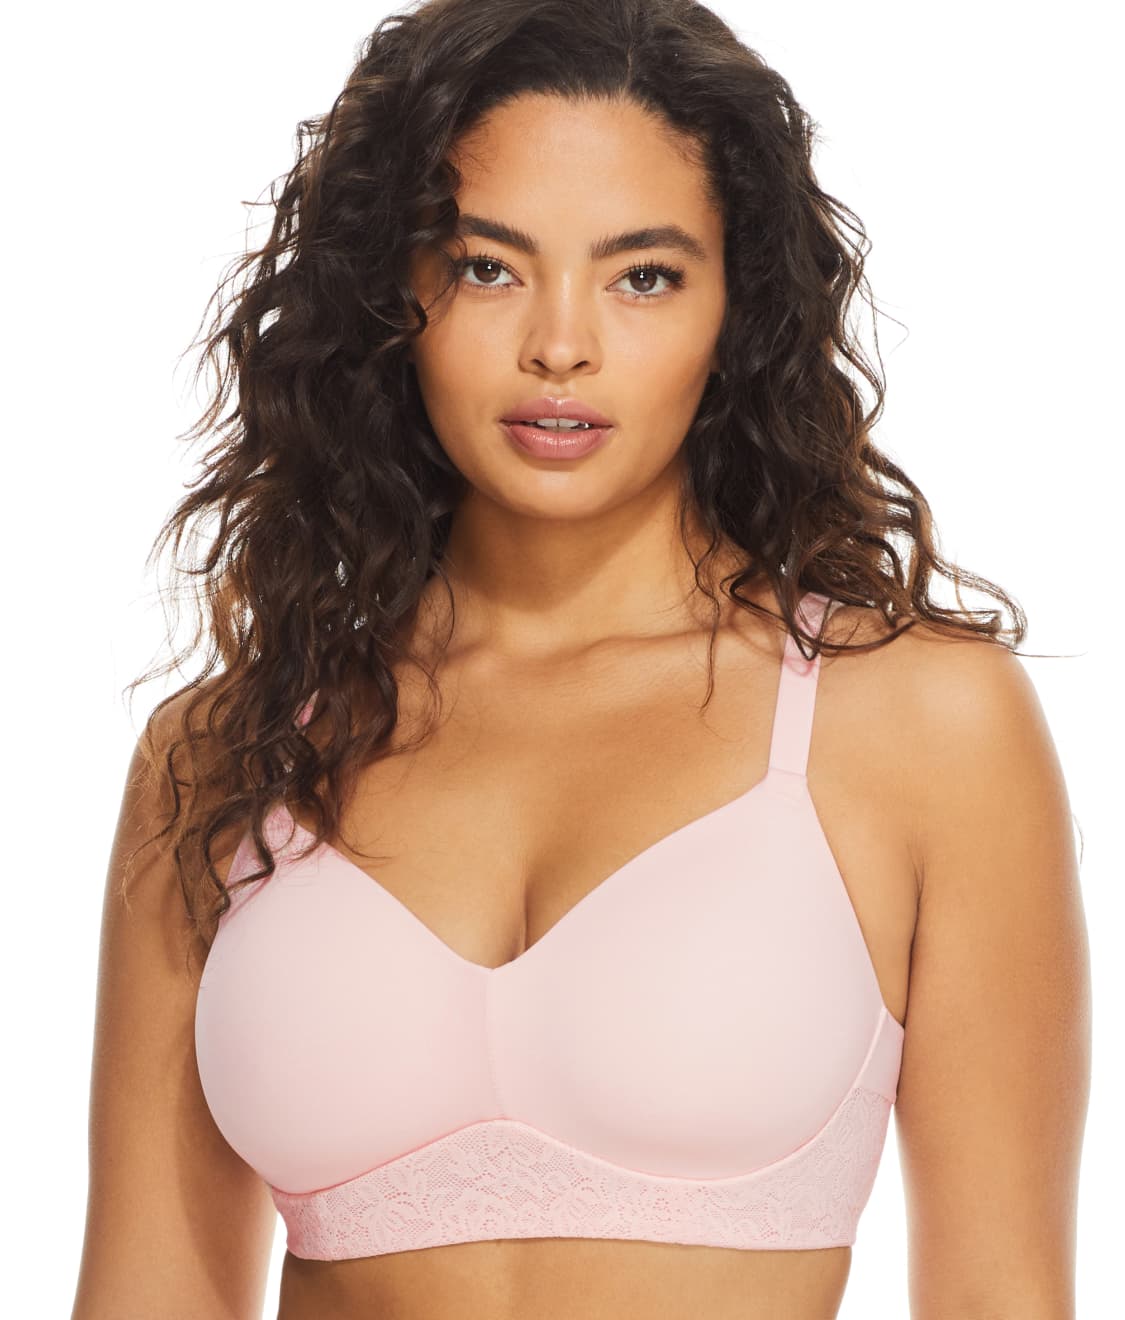 Shop bras that you'll want to wear every day. Find your perfect